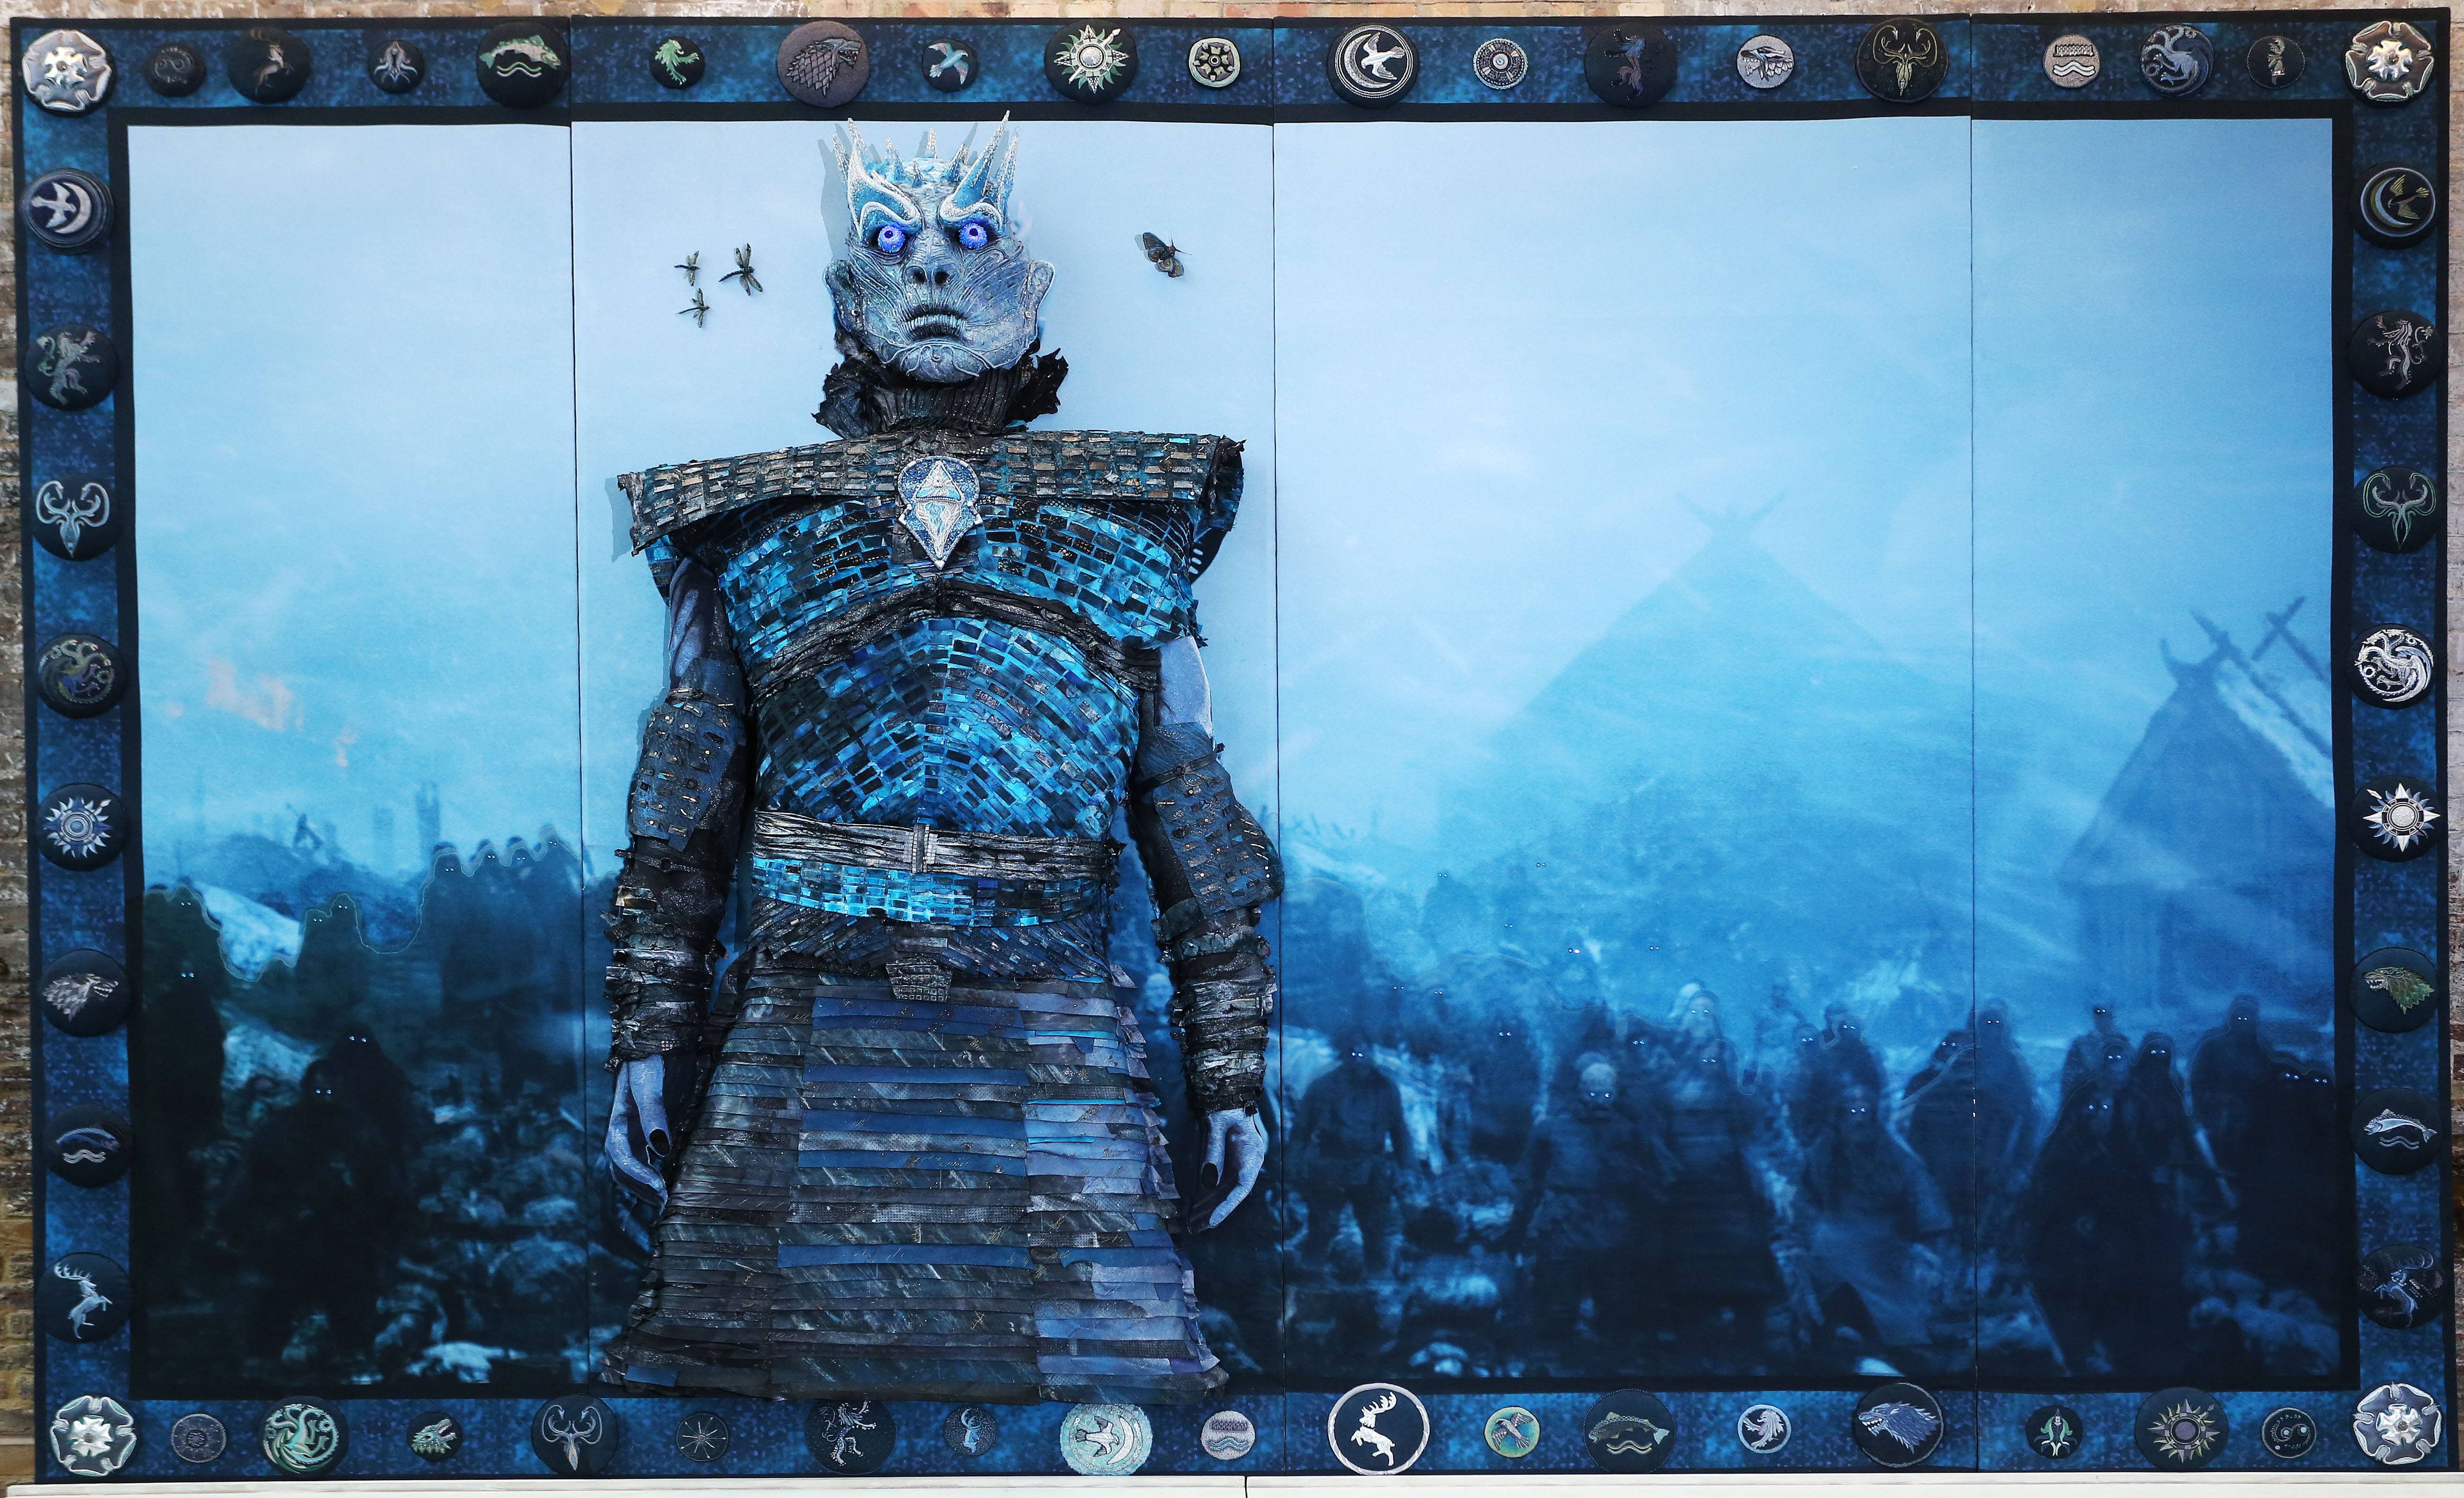 Large scale embroidery displayed to launch Game of Thrones Fifth Season on Blu-ray and DVD, London, UK, 18th March 2016